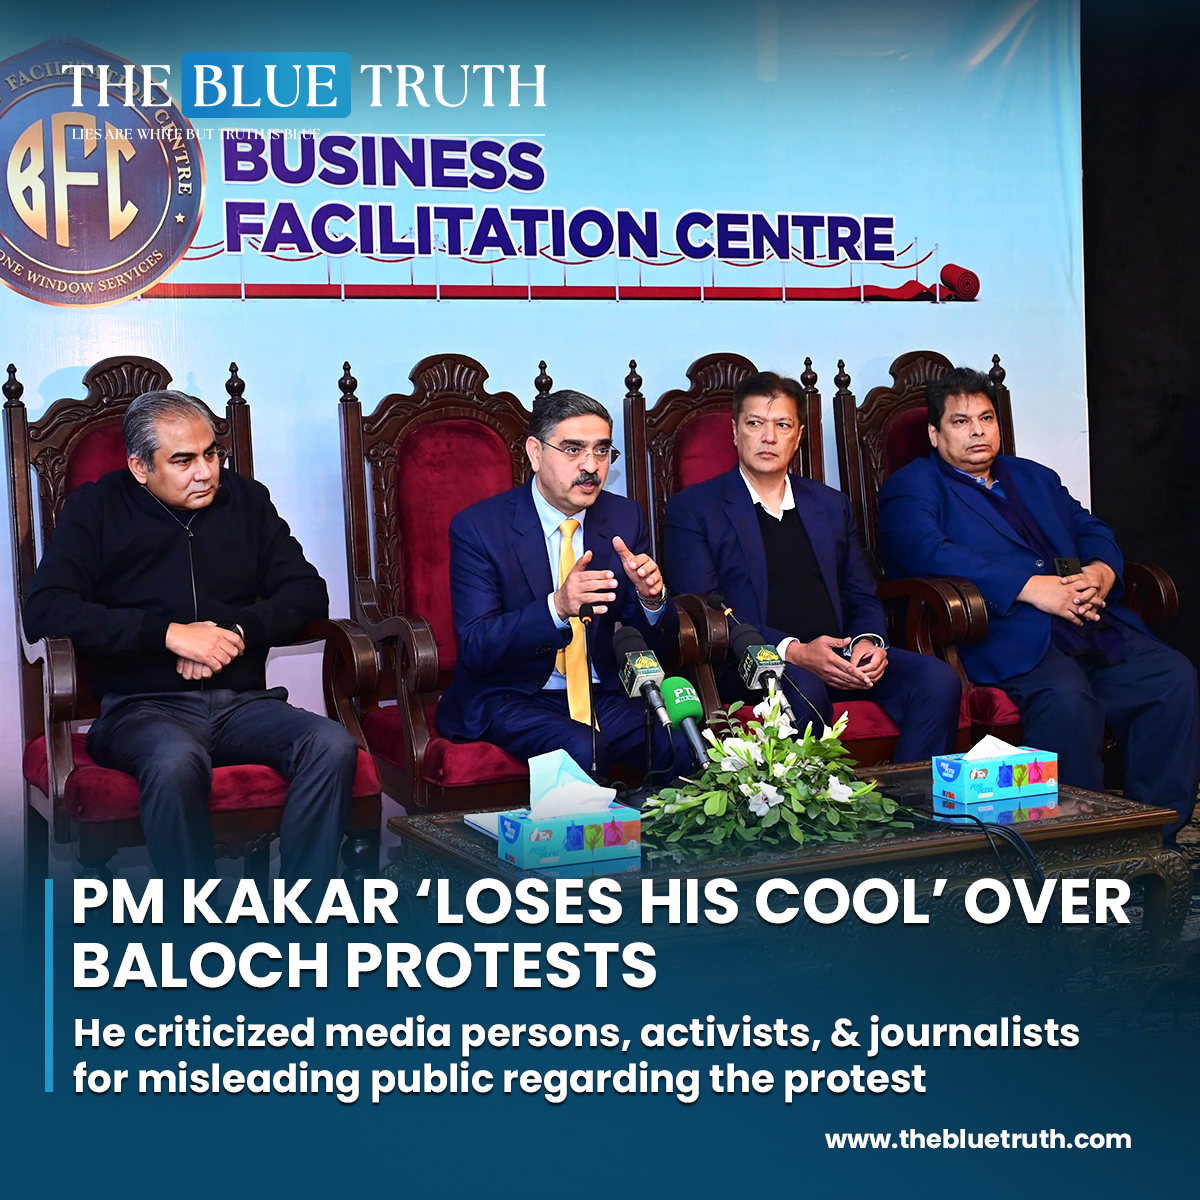 PM Kakar ‘loses his cool’ over Baloch protests.
He criticized media persons, activists, & journalists for misleading public regarding the protest.

#PMKakar #BalochProtests #MediaCriticism #PublicOutcry
#MediaResponsibility #ProtestCoverage #tbt #TheBlueTruth